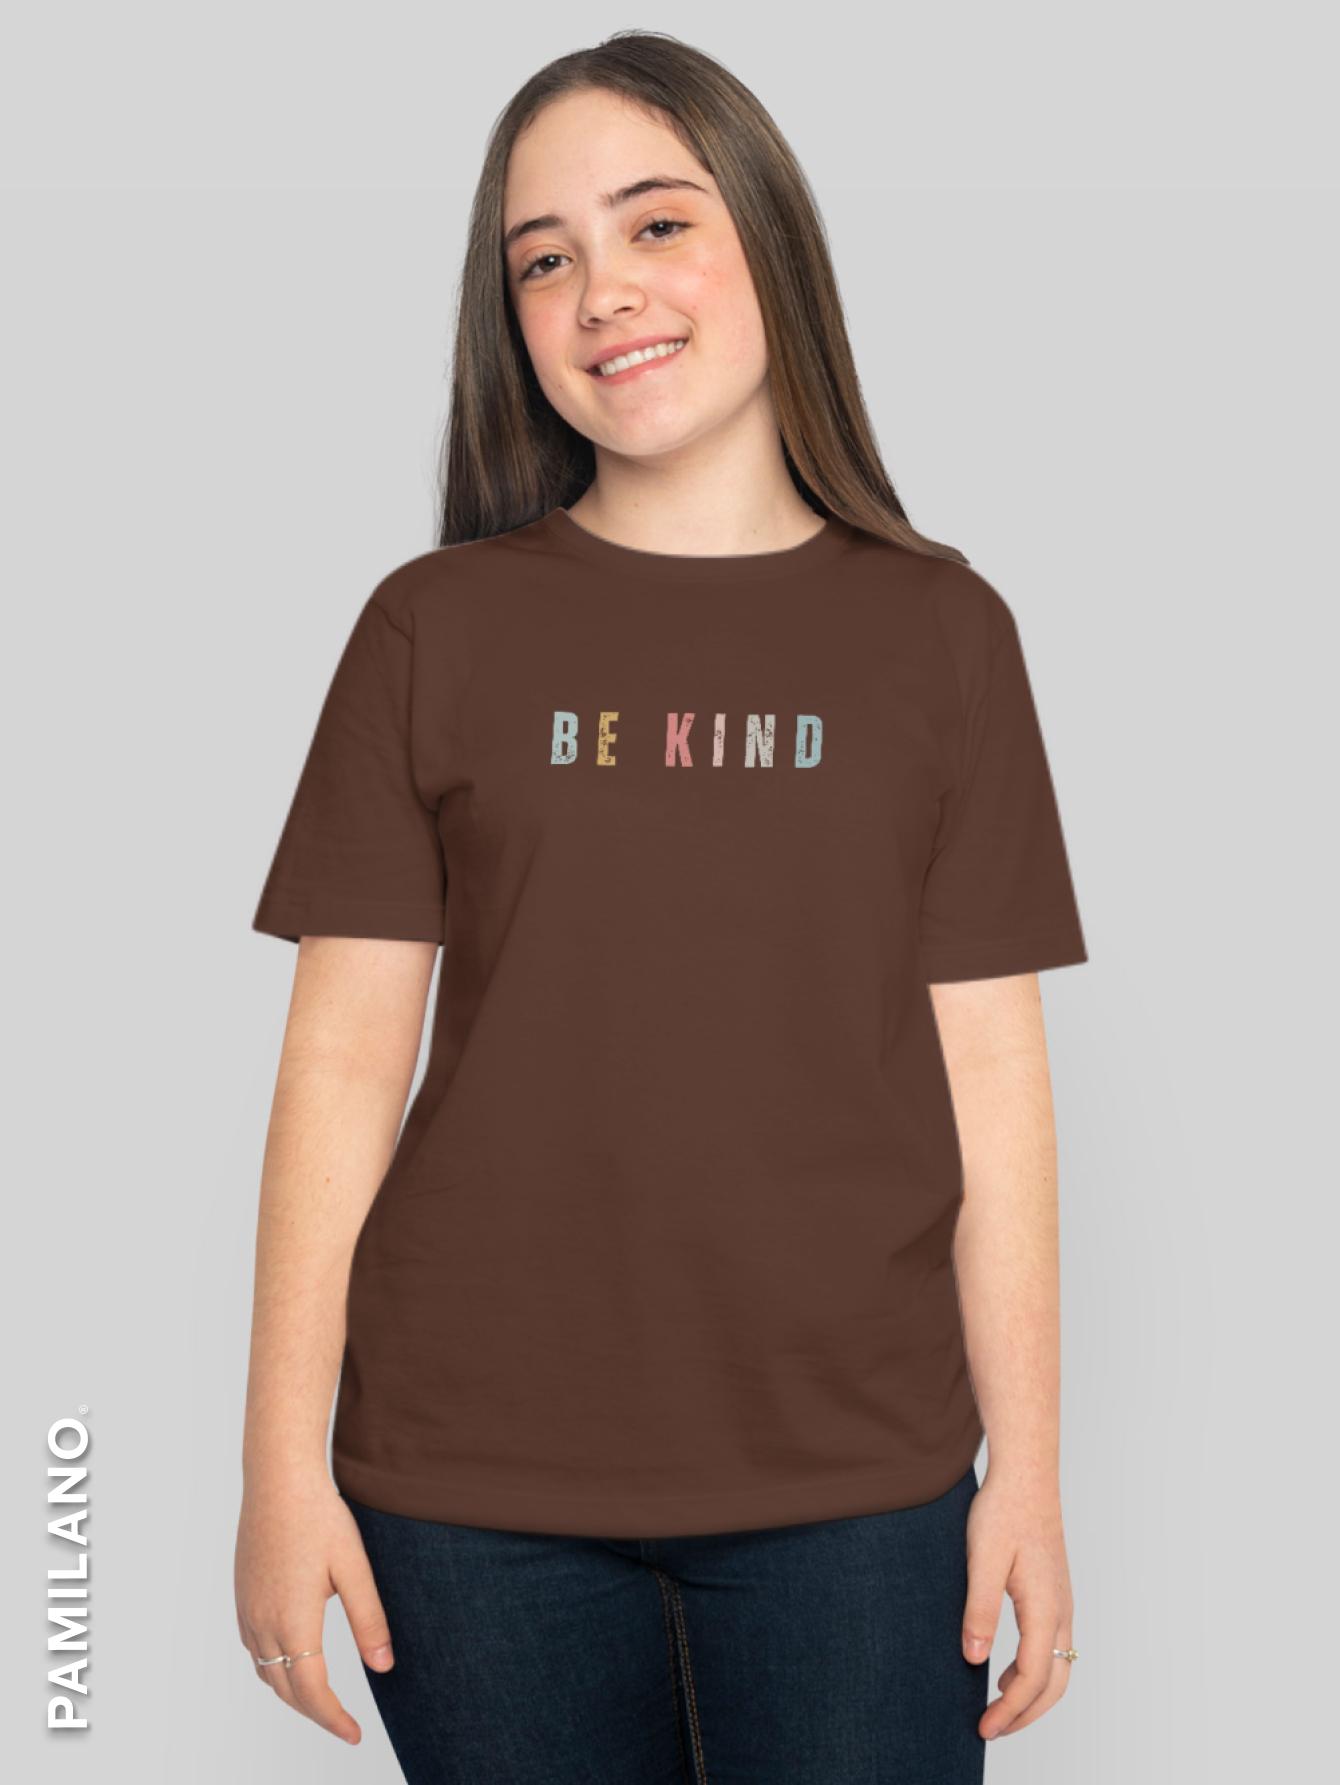 Be Kind round neck graphic tee